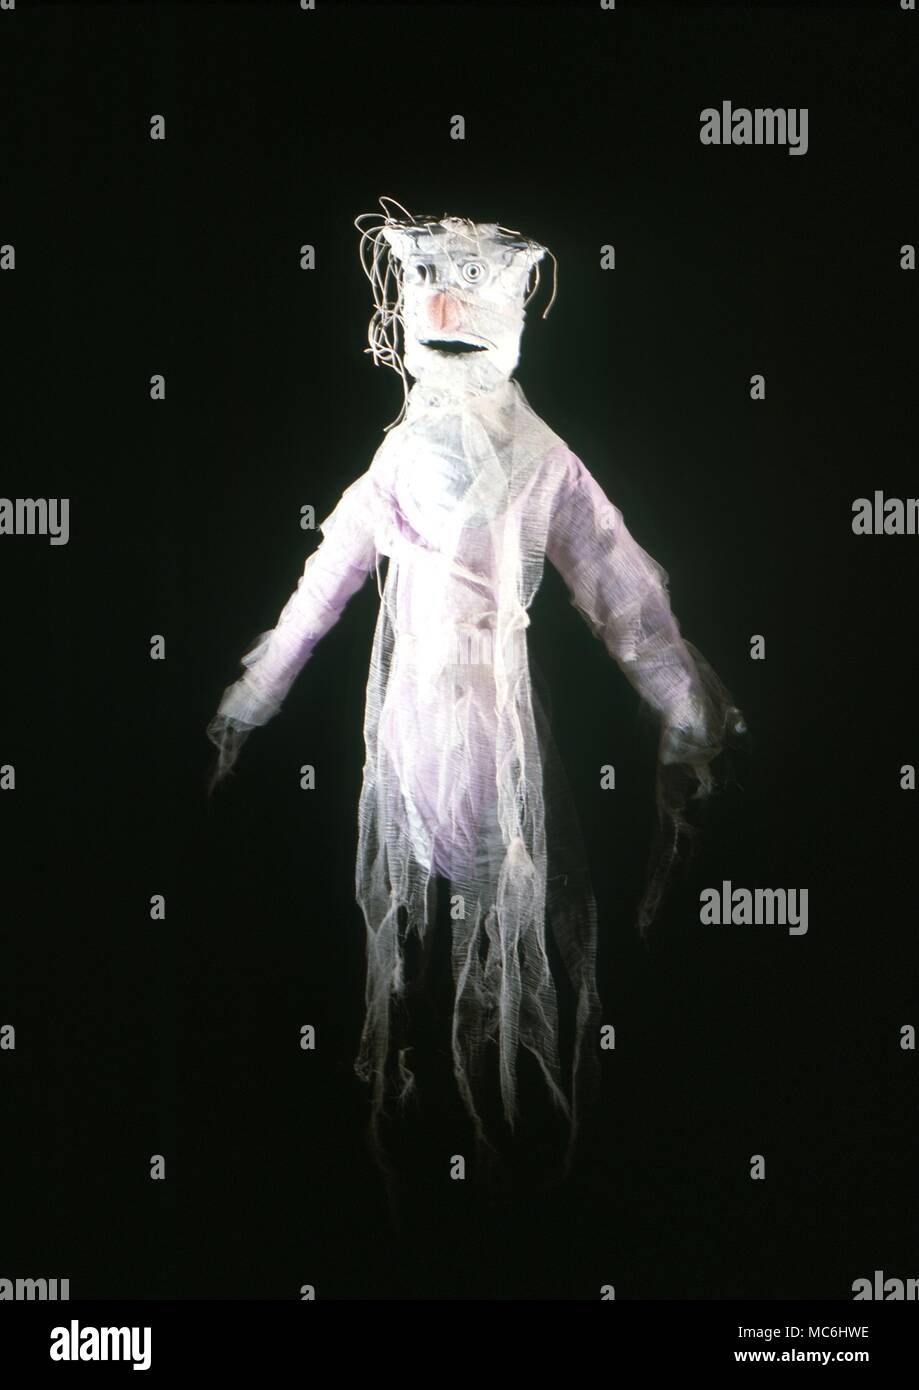 Stage Magic - Ghost from a hat. The magician shows the audience an empty hat and then proceeds to take from it a human-sized ghost! The ghost is made of muslin and its form is derived from thin coiled wire springs; it therefore fits easily into a hat. Stock Photo